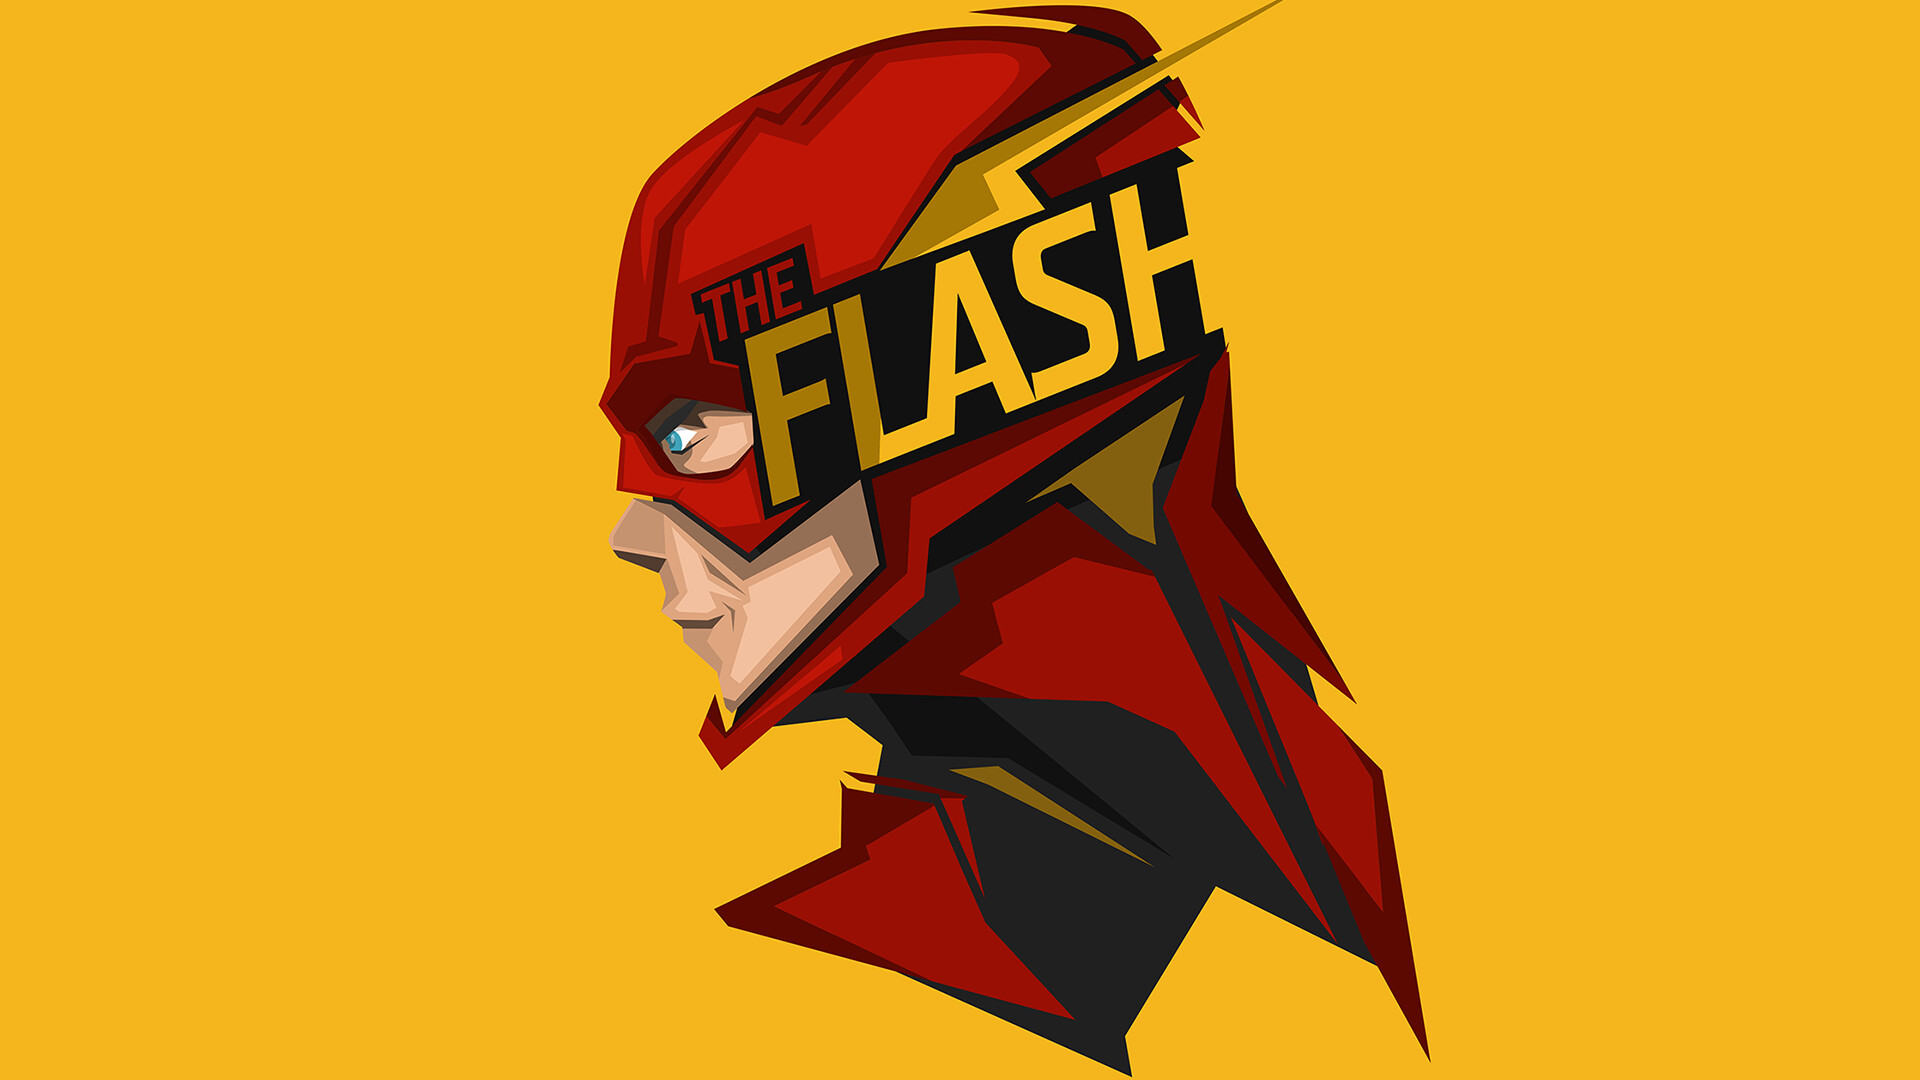 Flash (DC): Barry Allen, A forensic scientist, Born to Henry and Nora Allen. 1920x1080 Full HD Wallpaper.